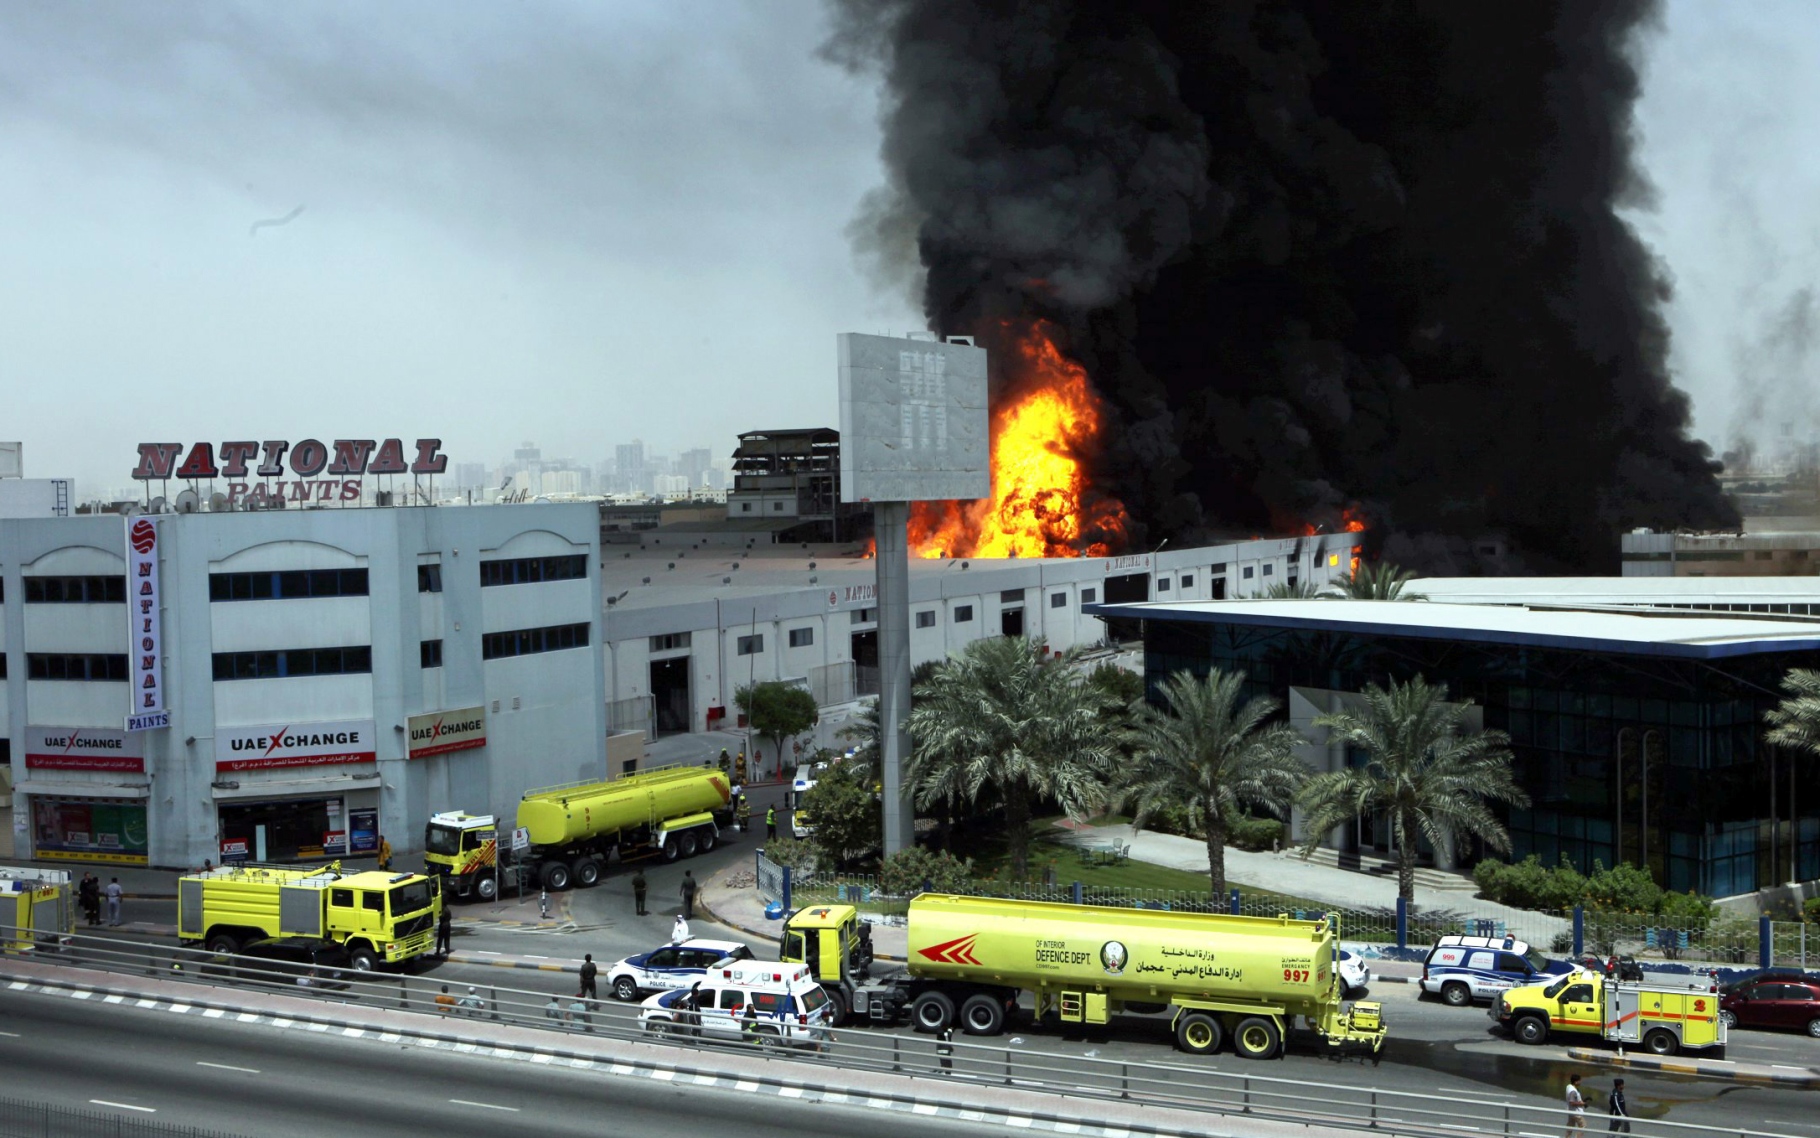 Smoke billows into the sky as flames engulf the National Paints factory in Sharjah on May 11, 2010. (OSAMA ABUGHANIM)